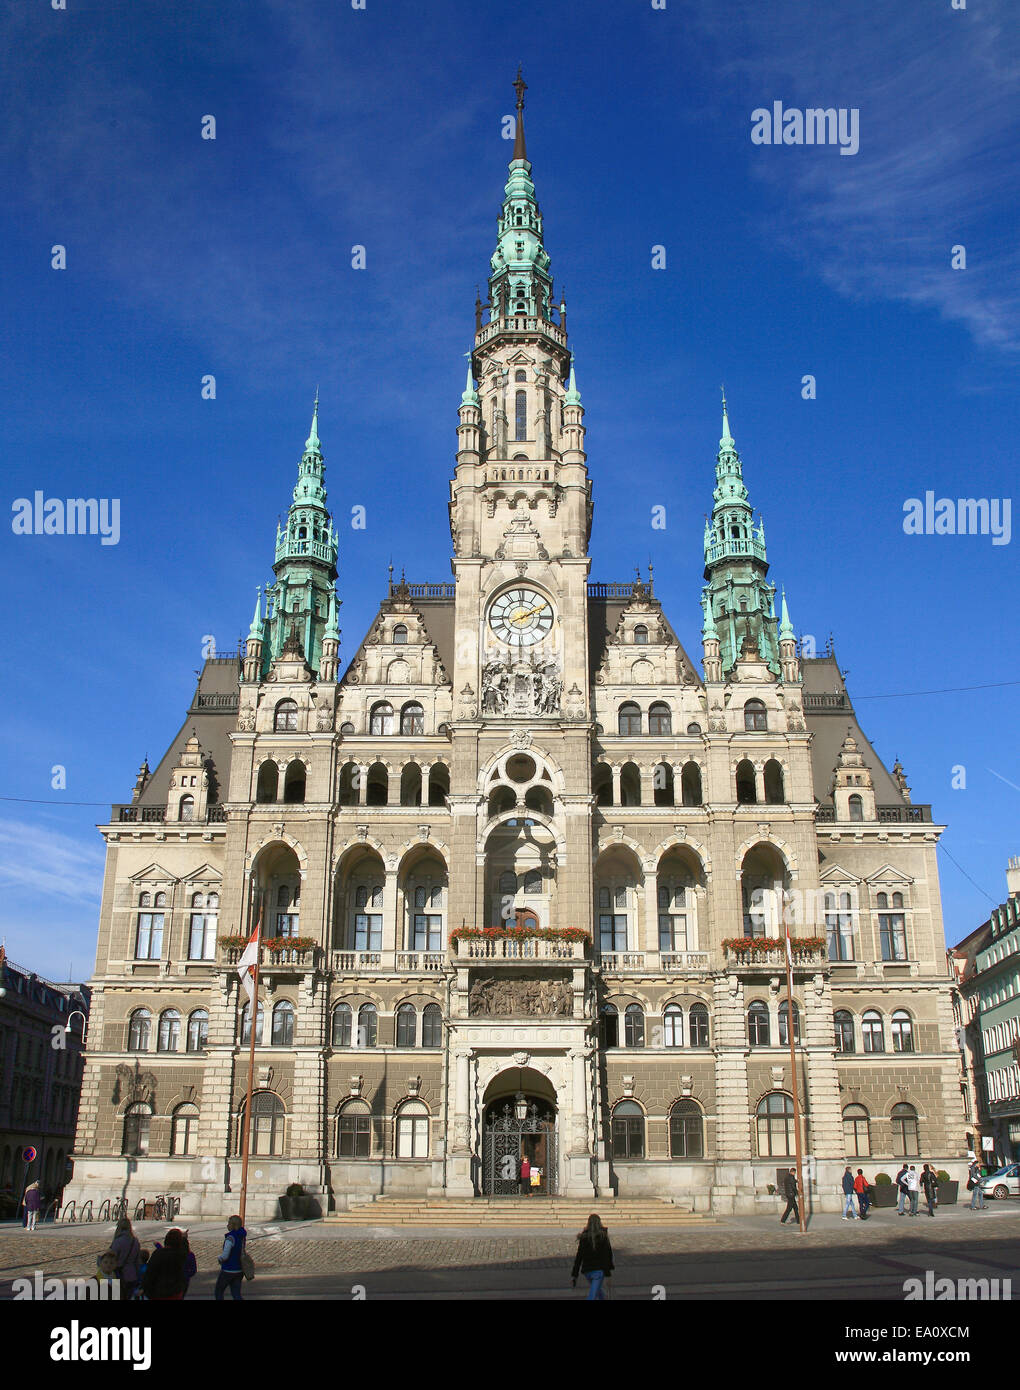 Reichberg, Czech Republic. 27th Oct, 2014. A view of the entrance facade of the town hall in Reichberg, Czech Republic, 27 October 2014. The town hall with its 65 metre tall spire was built according to the plance of architect Franz von Neumann between 1888 and 1893. Due to its architectural similarity with the Vienna's city hall, Reichenberg ist also know as the Vienna of the North. Photo: Frederik Wolf/dpa - - NO WIRE SERVICE -/dpa/Alamy Live News Stock Photo